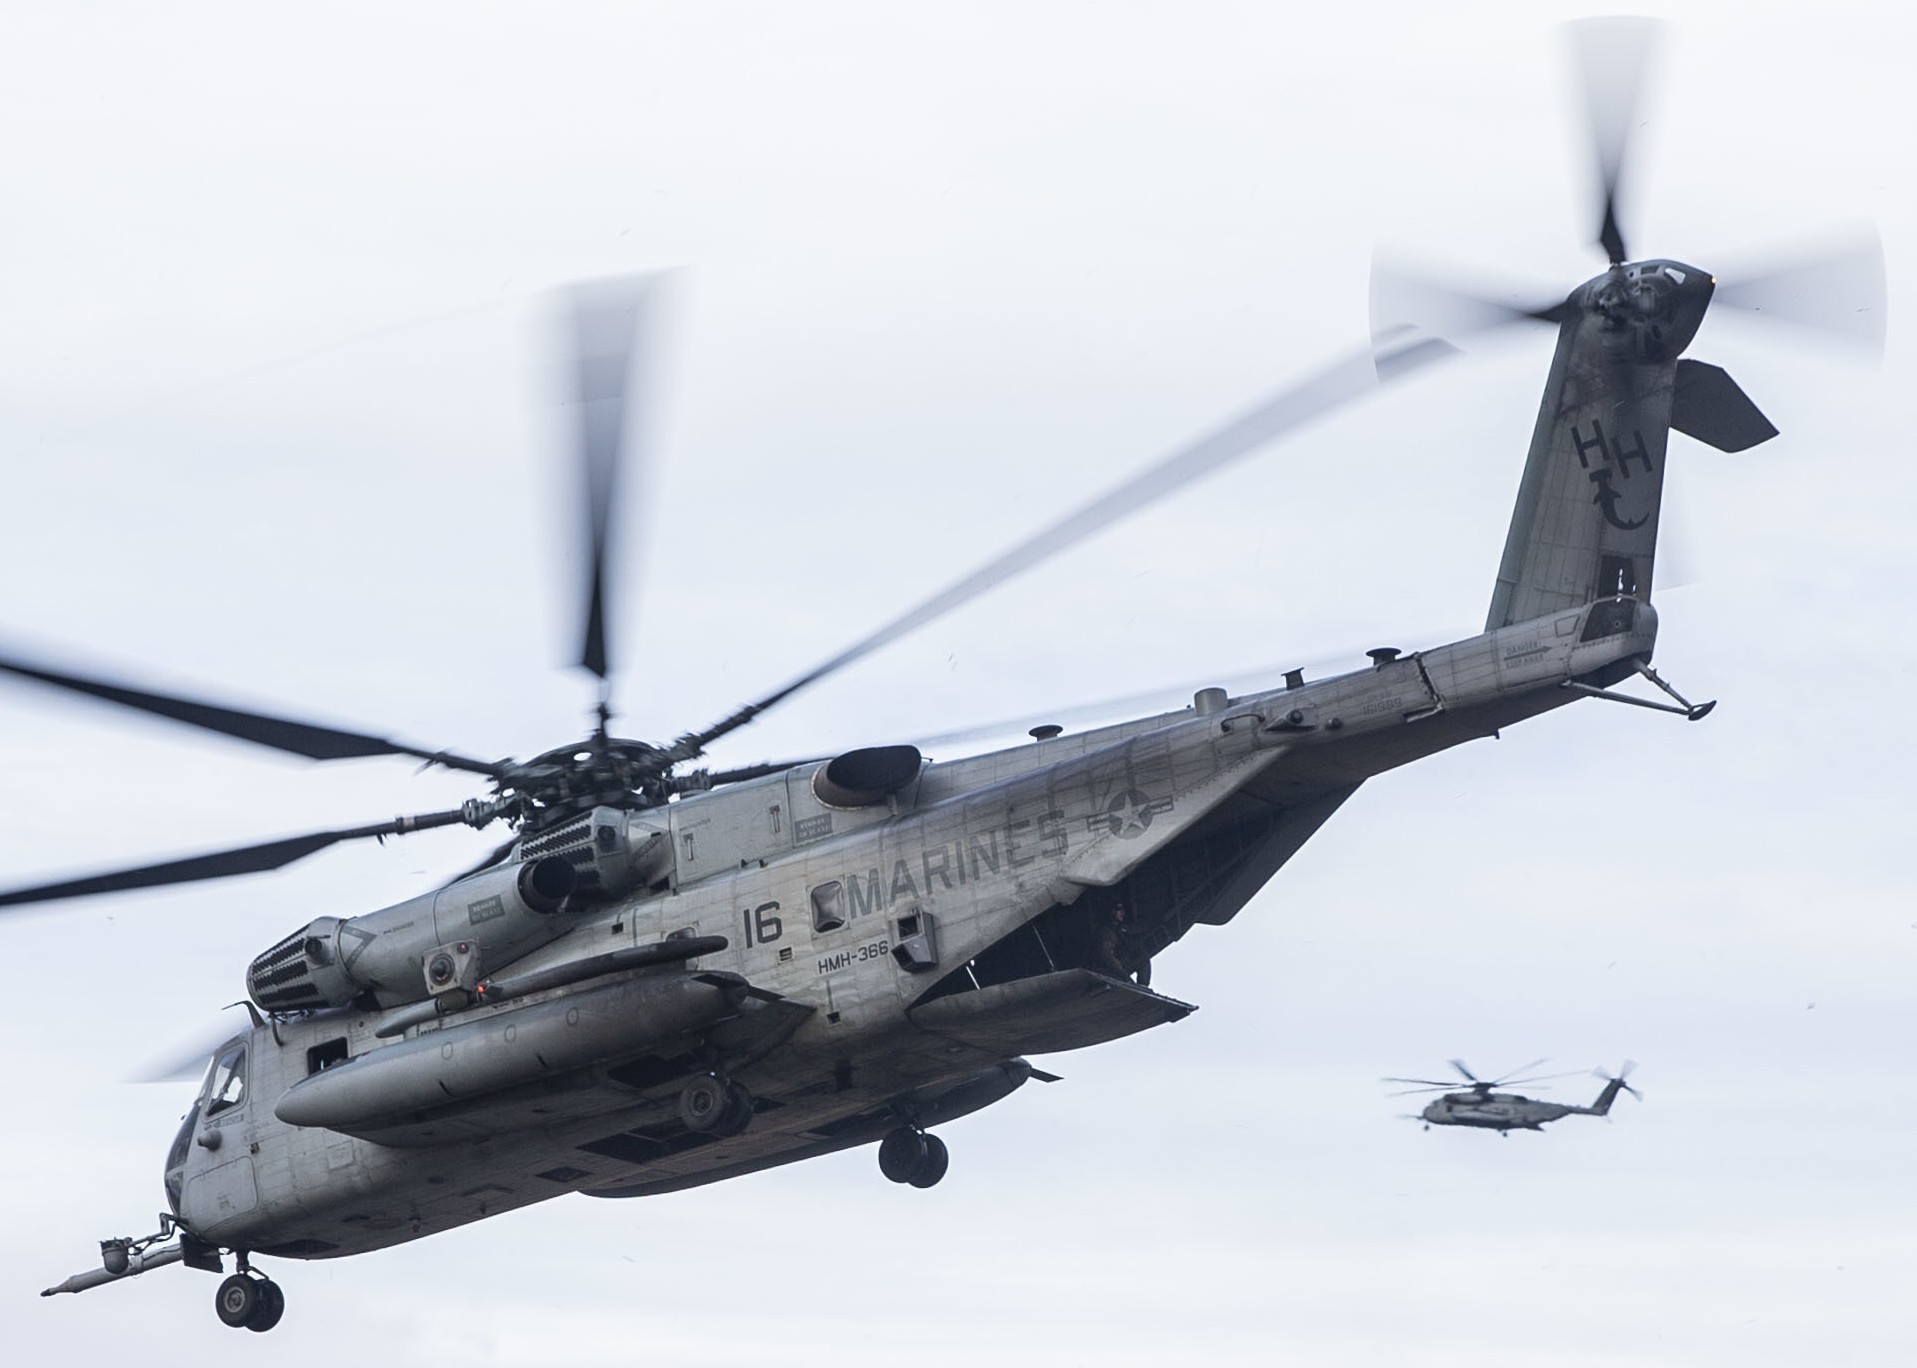 hmh-366 hammerheads marine heavy helicopter squadron usmc sikorsky ch-53e super stallion 81 exercise trident juncture norway